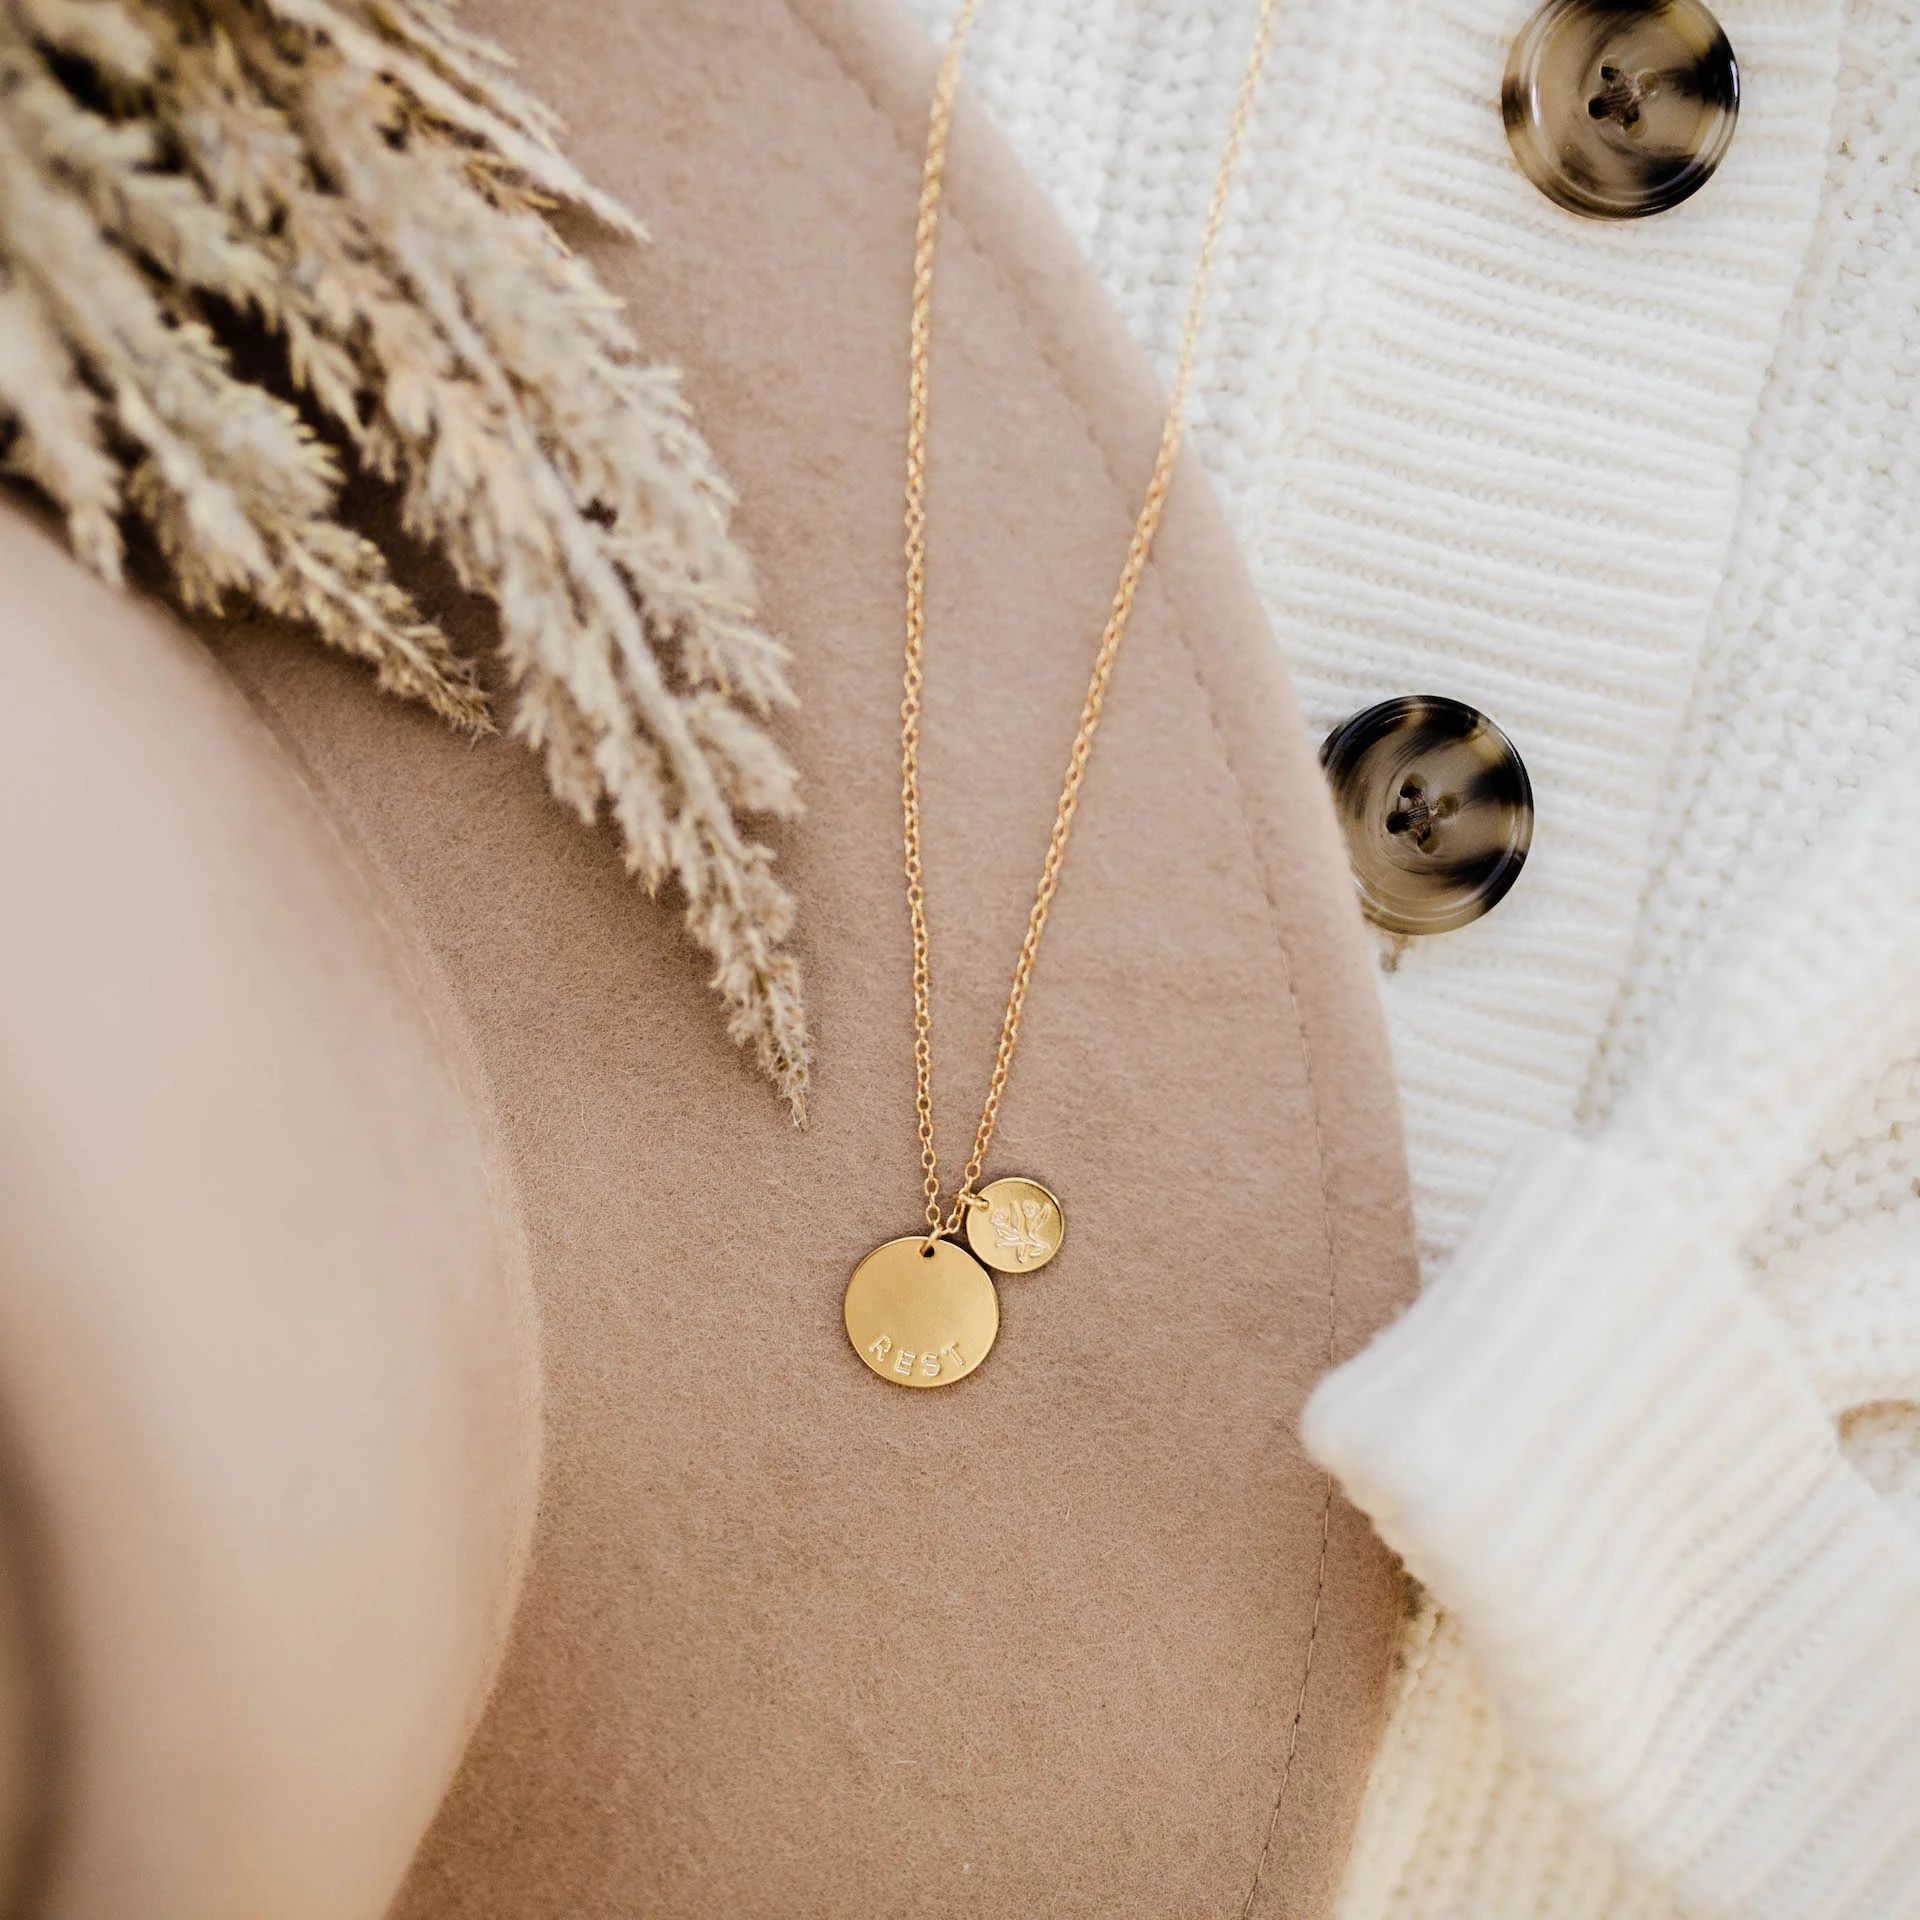 Rest for this Season Necklace | The Daily Grace Co.